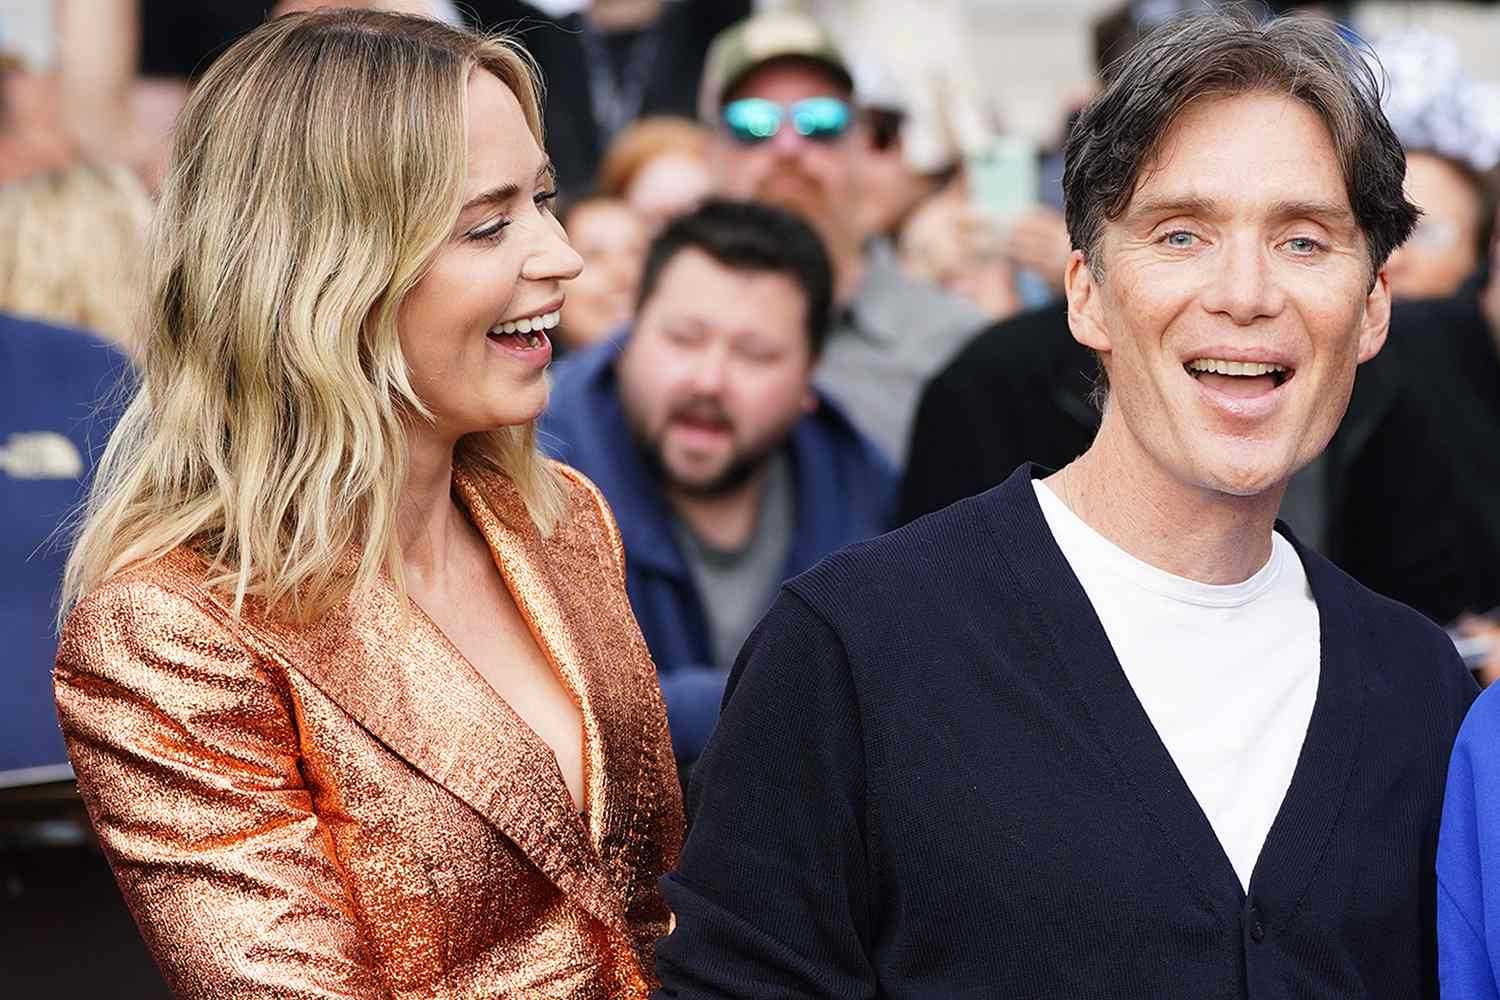 Emily Blunt shares her insights on why fans are enthralled by Oppenheimer co-star Cillian Murphy